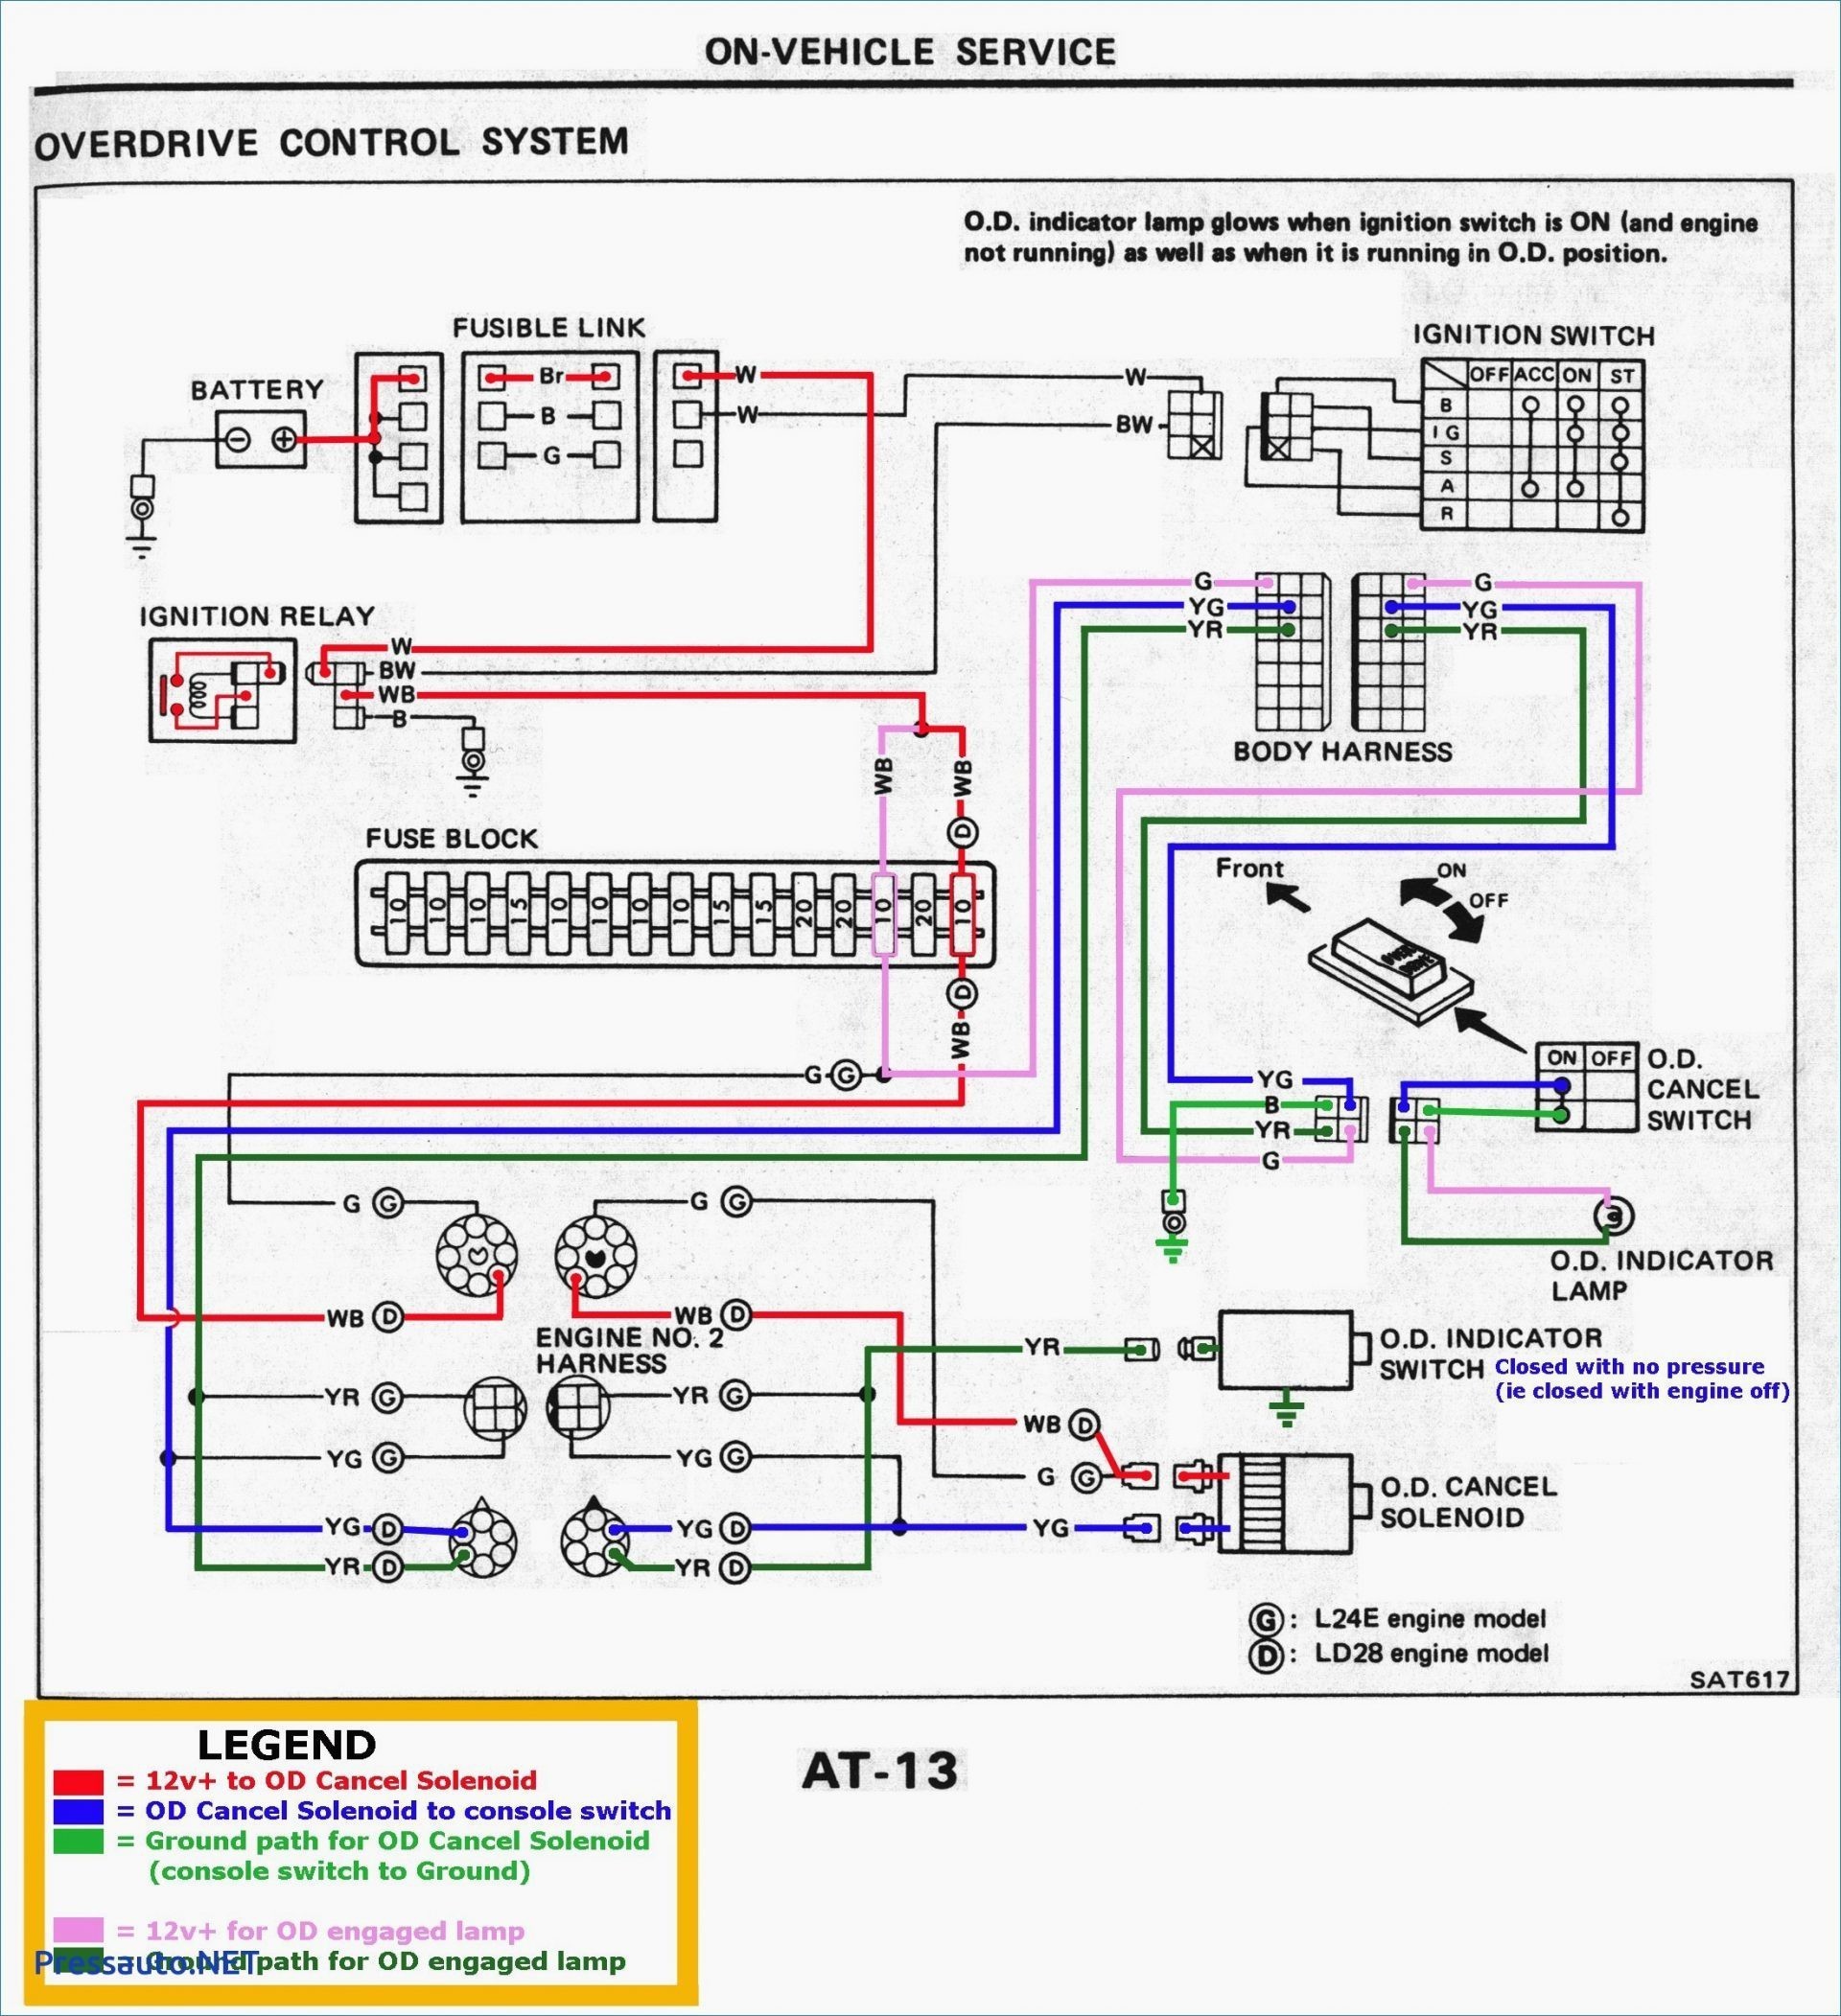 Wiring Diagram Boat Running Lights Valid Wiring Diagram for Boat Trailer Plug top Rated Harbor Freight